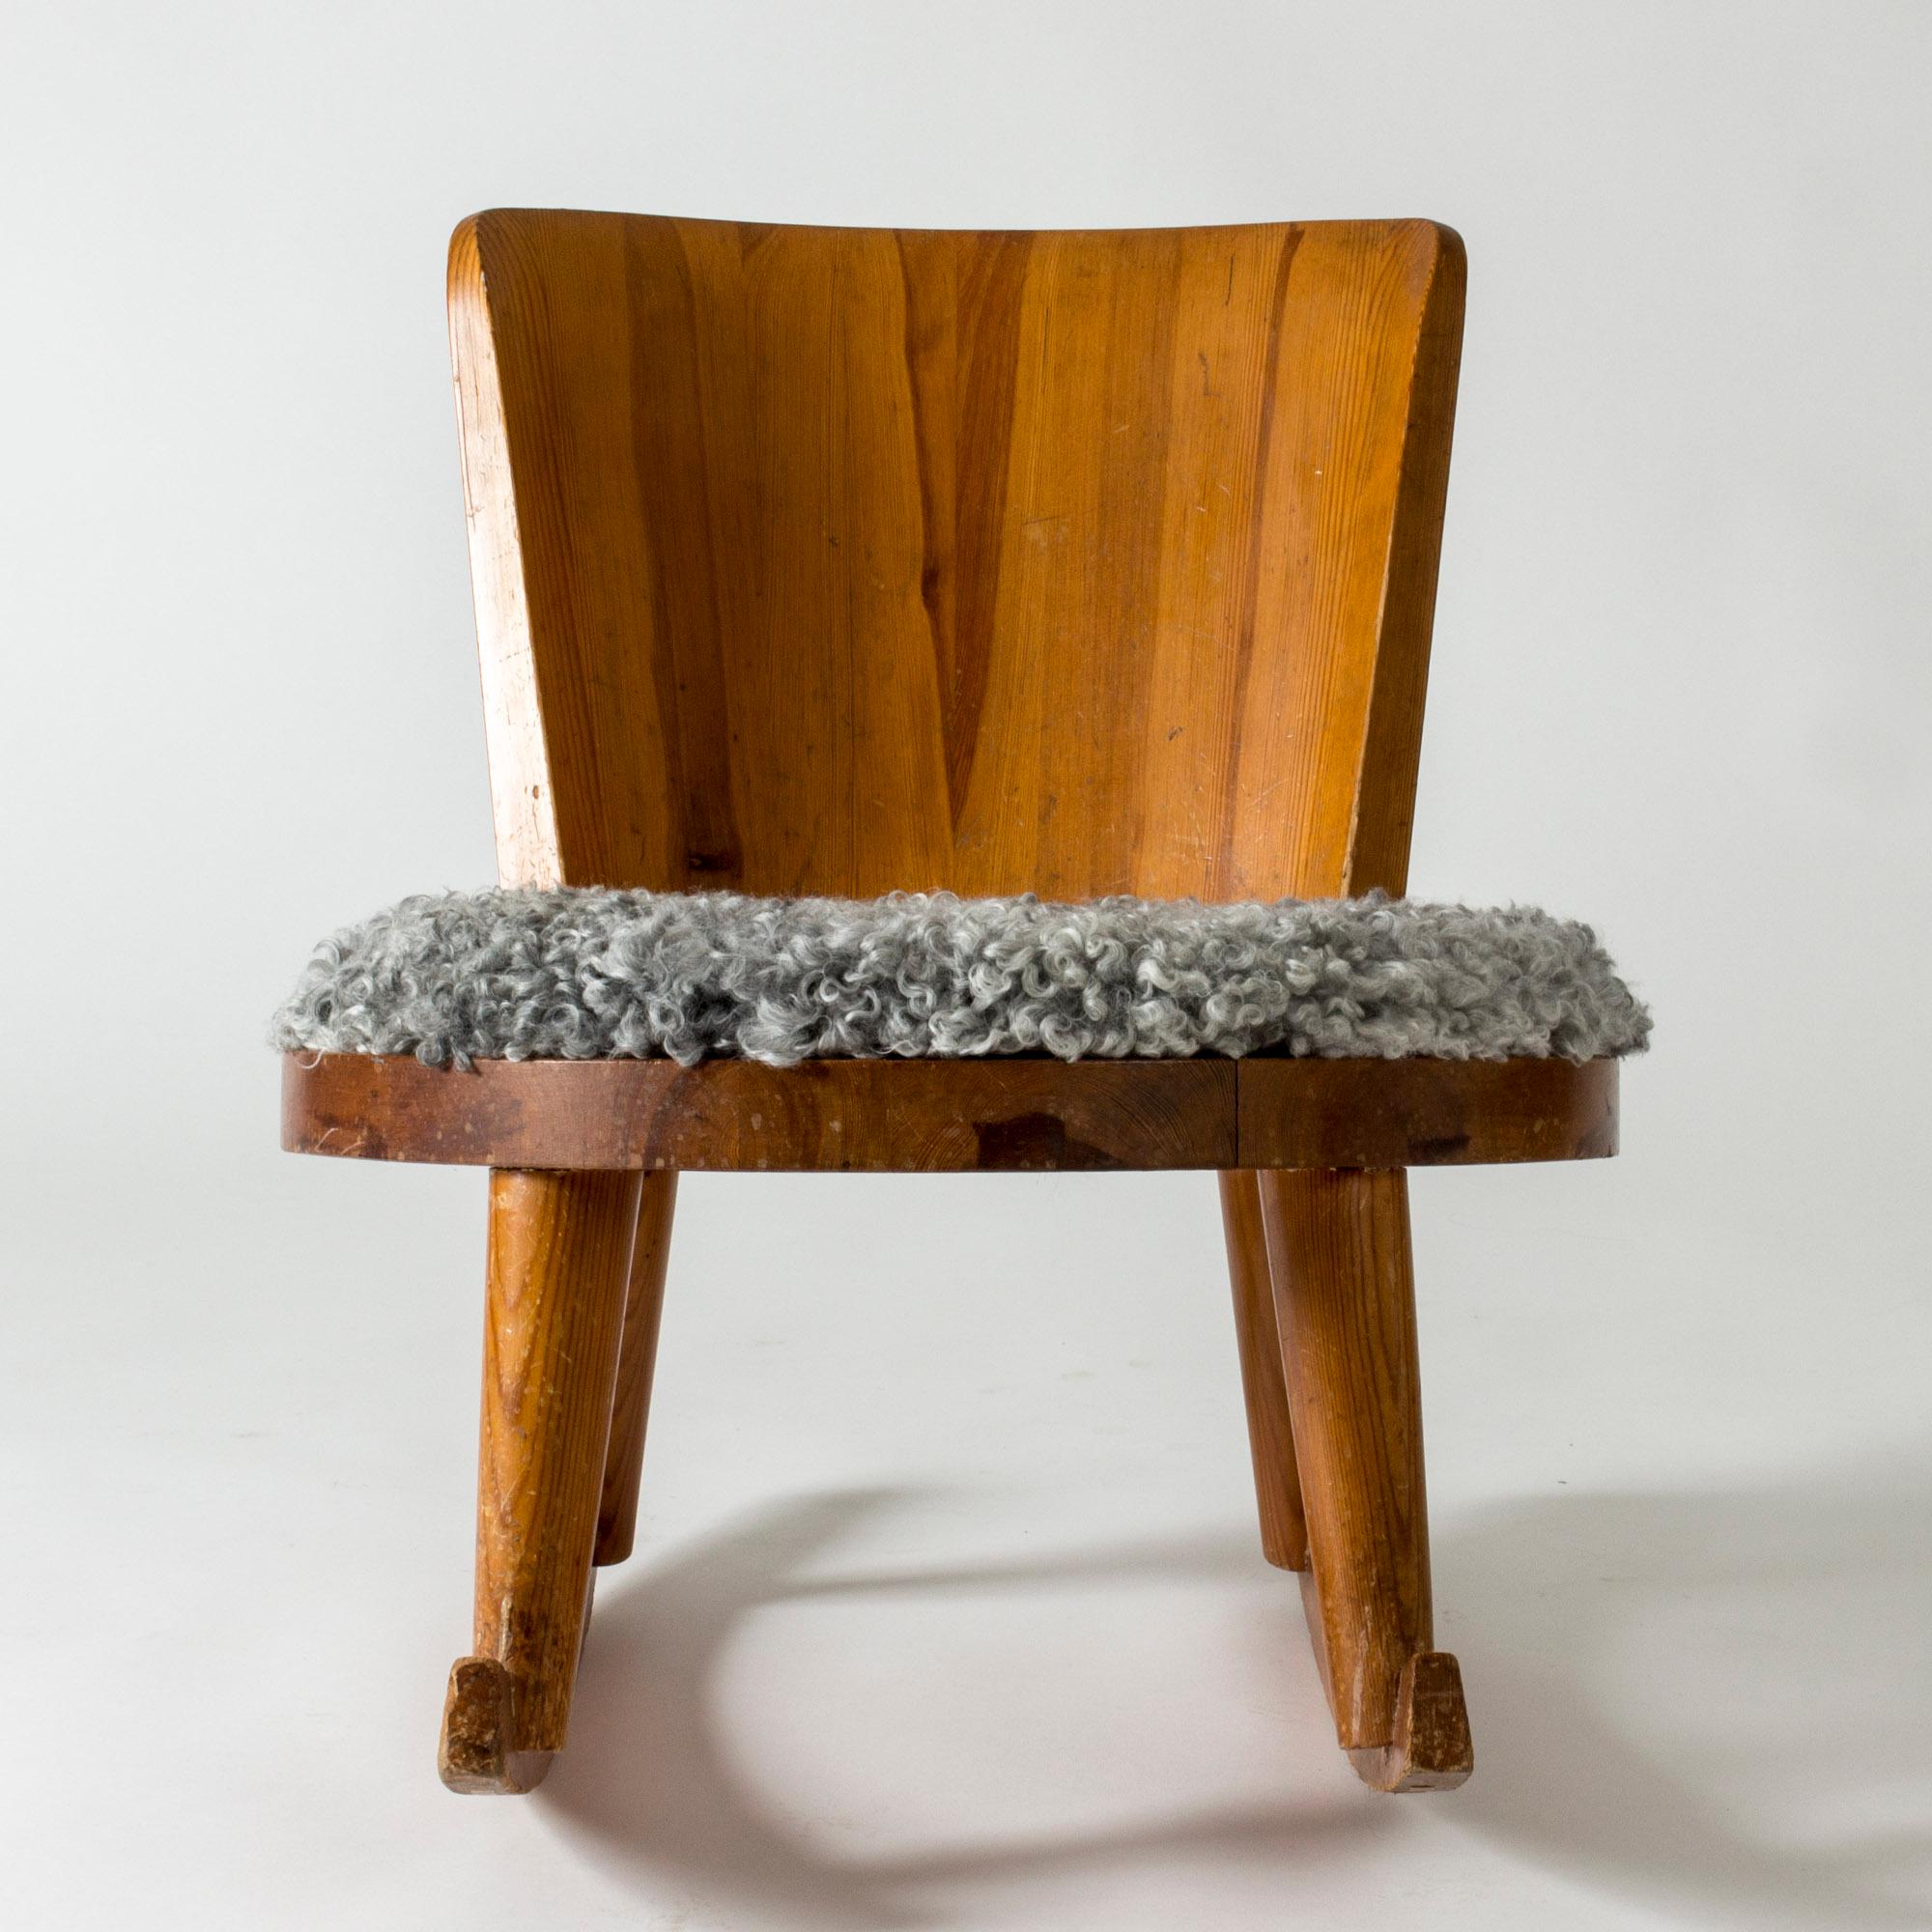 Cool modernist rocking chair by Torsten Claesson, made from pine with a removable sheepskin cushion. Neat design with rounded lines.